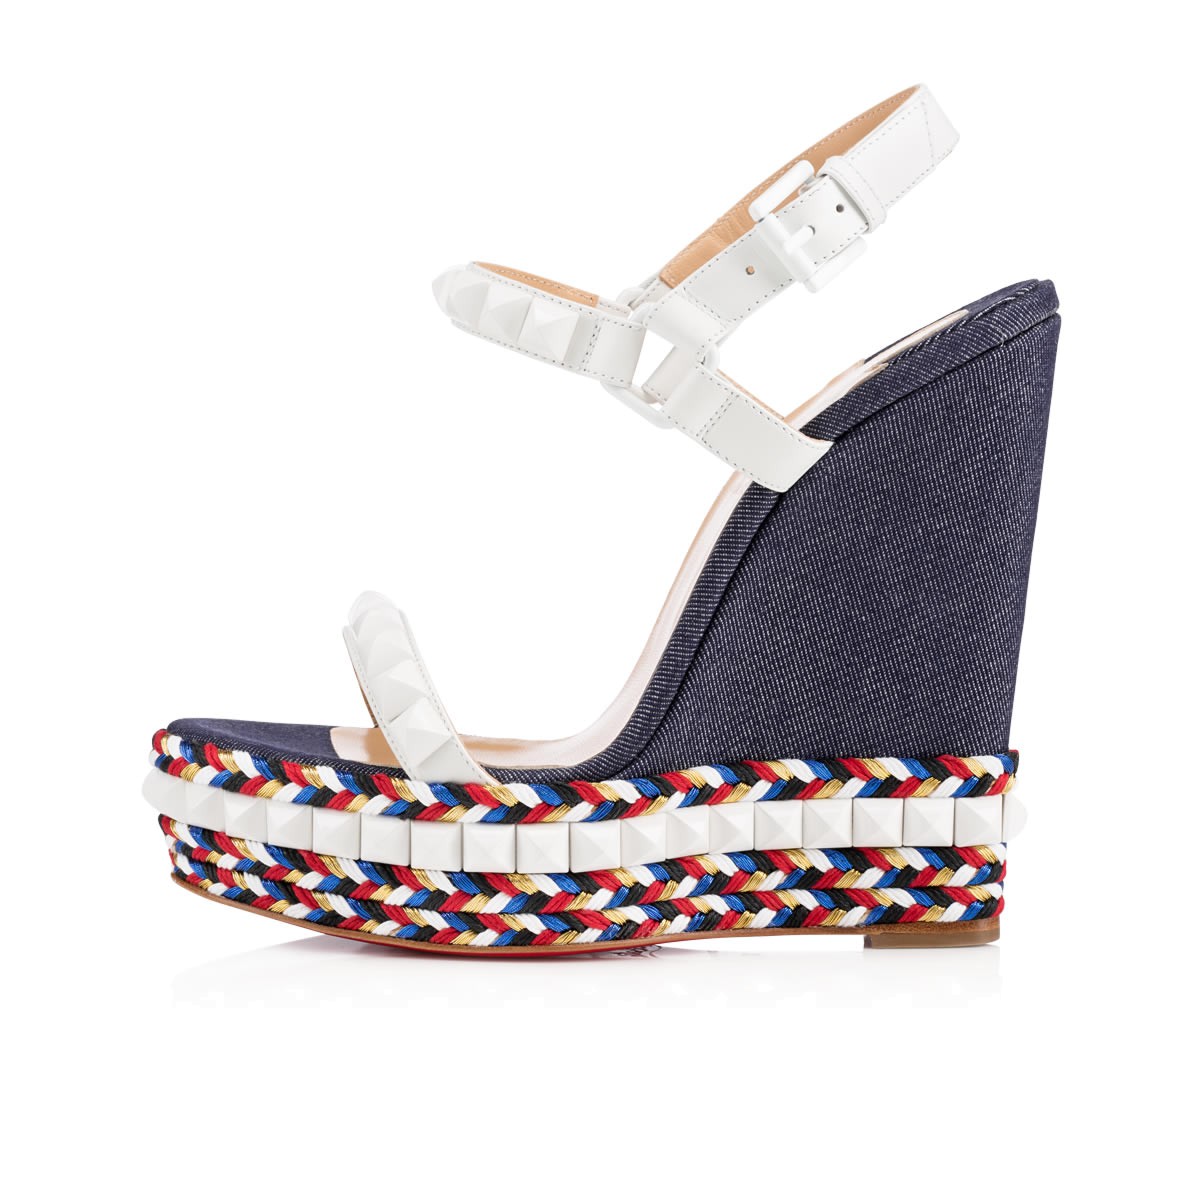 christian-louboutin-cataclou-red-white-blue-studded-wedge-espadrilles